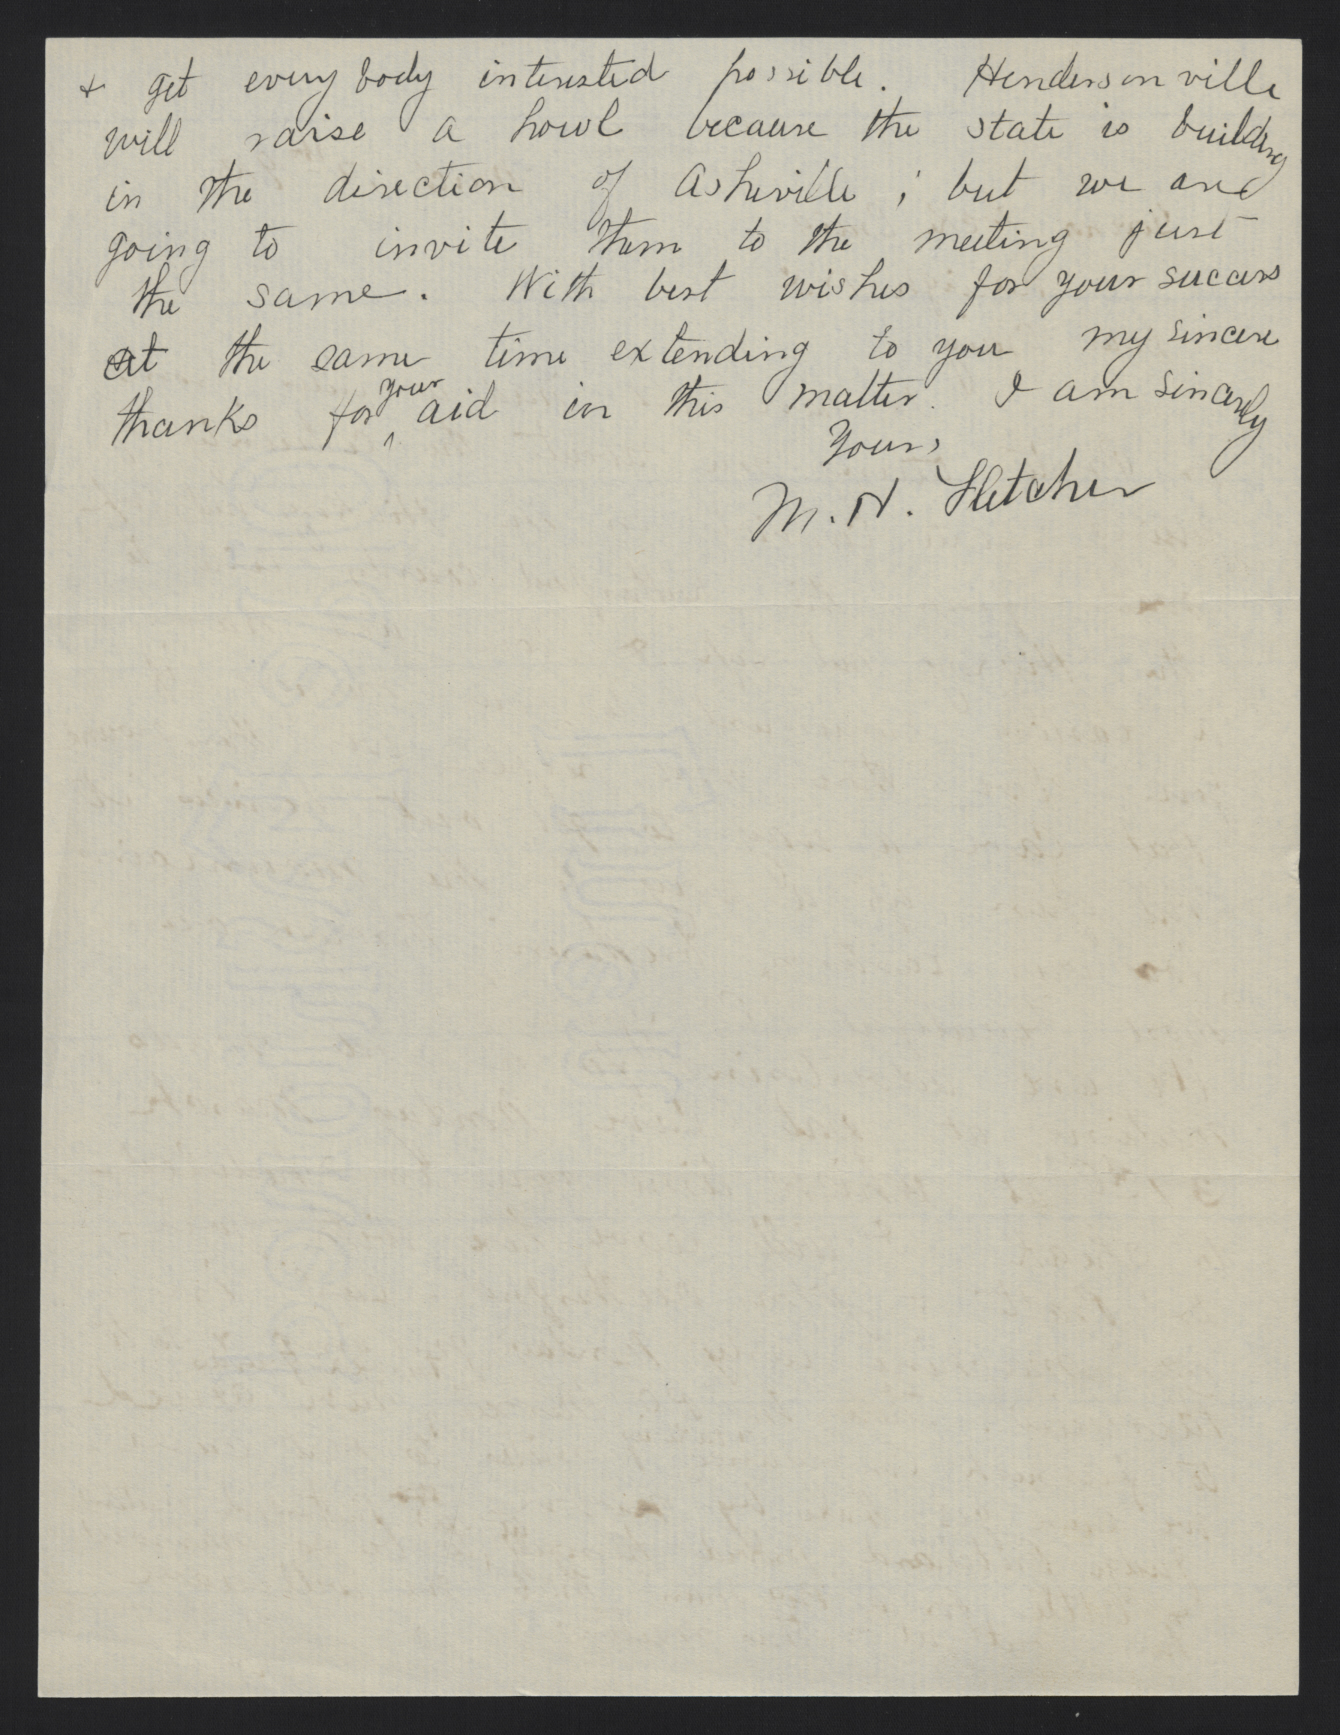 Letter from Fletcher to Craig, March 17, 1913, page 2